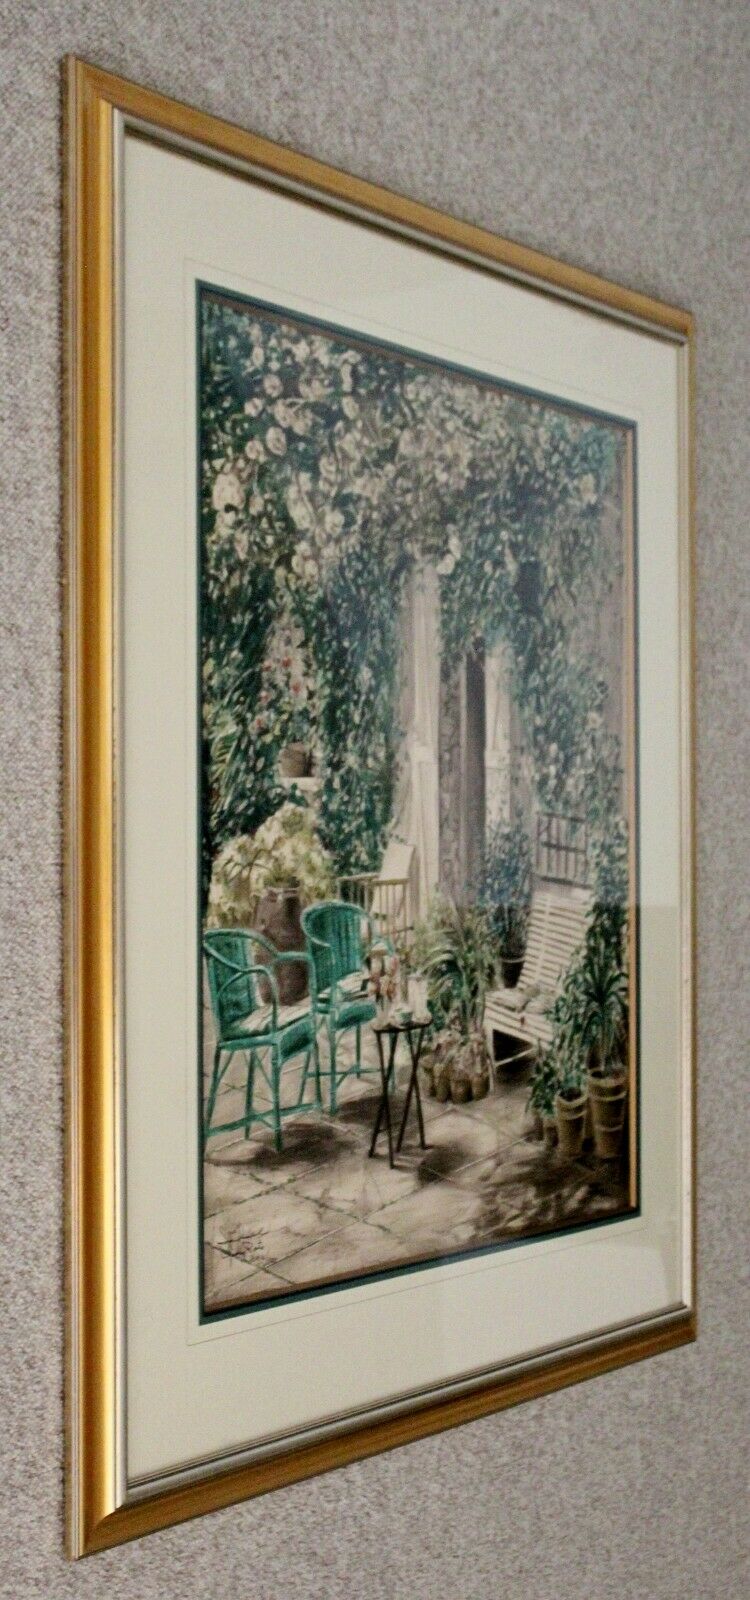 Contemporary Modern Framed Cafe Scene Lithograph Signed by Artist 292/300